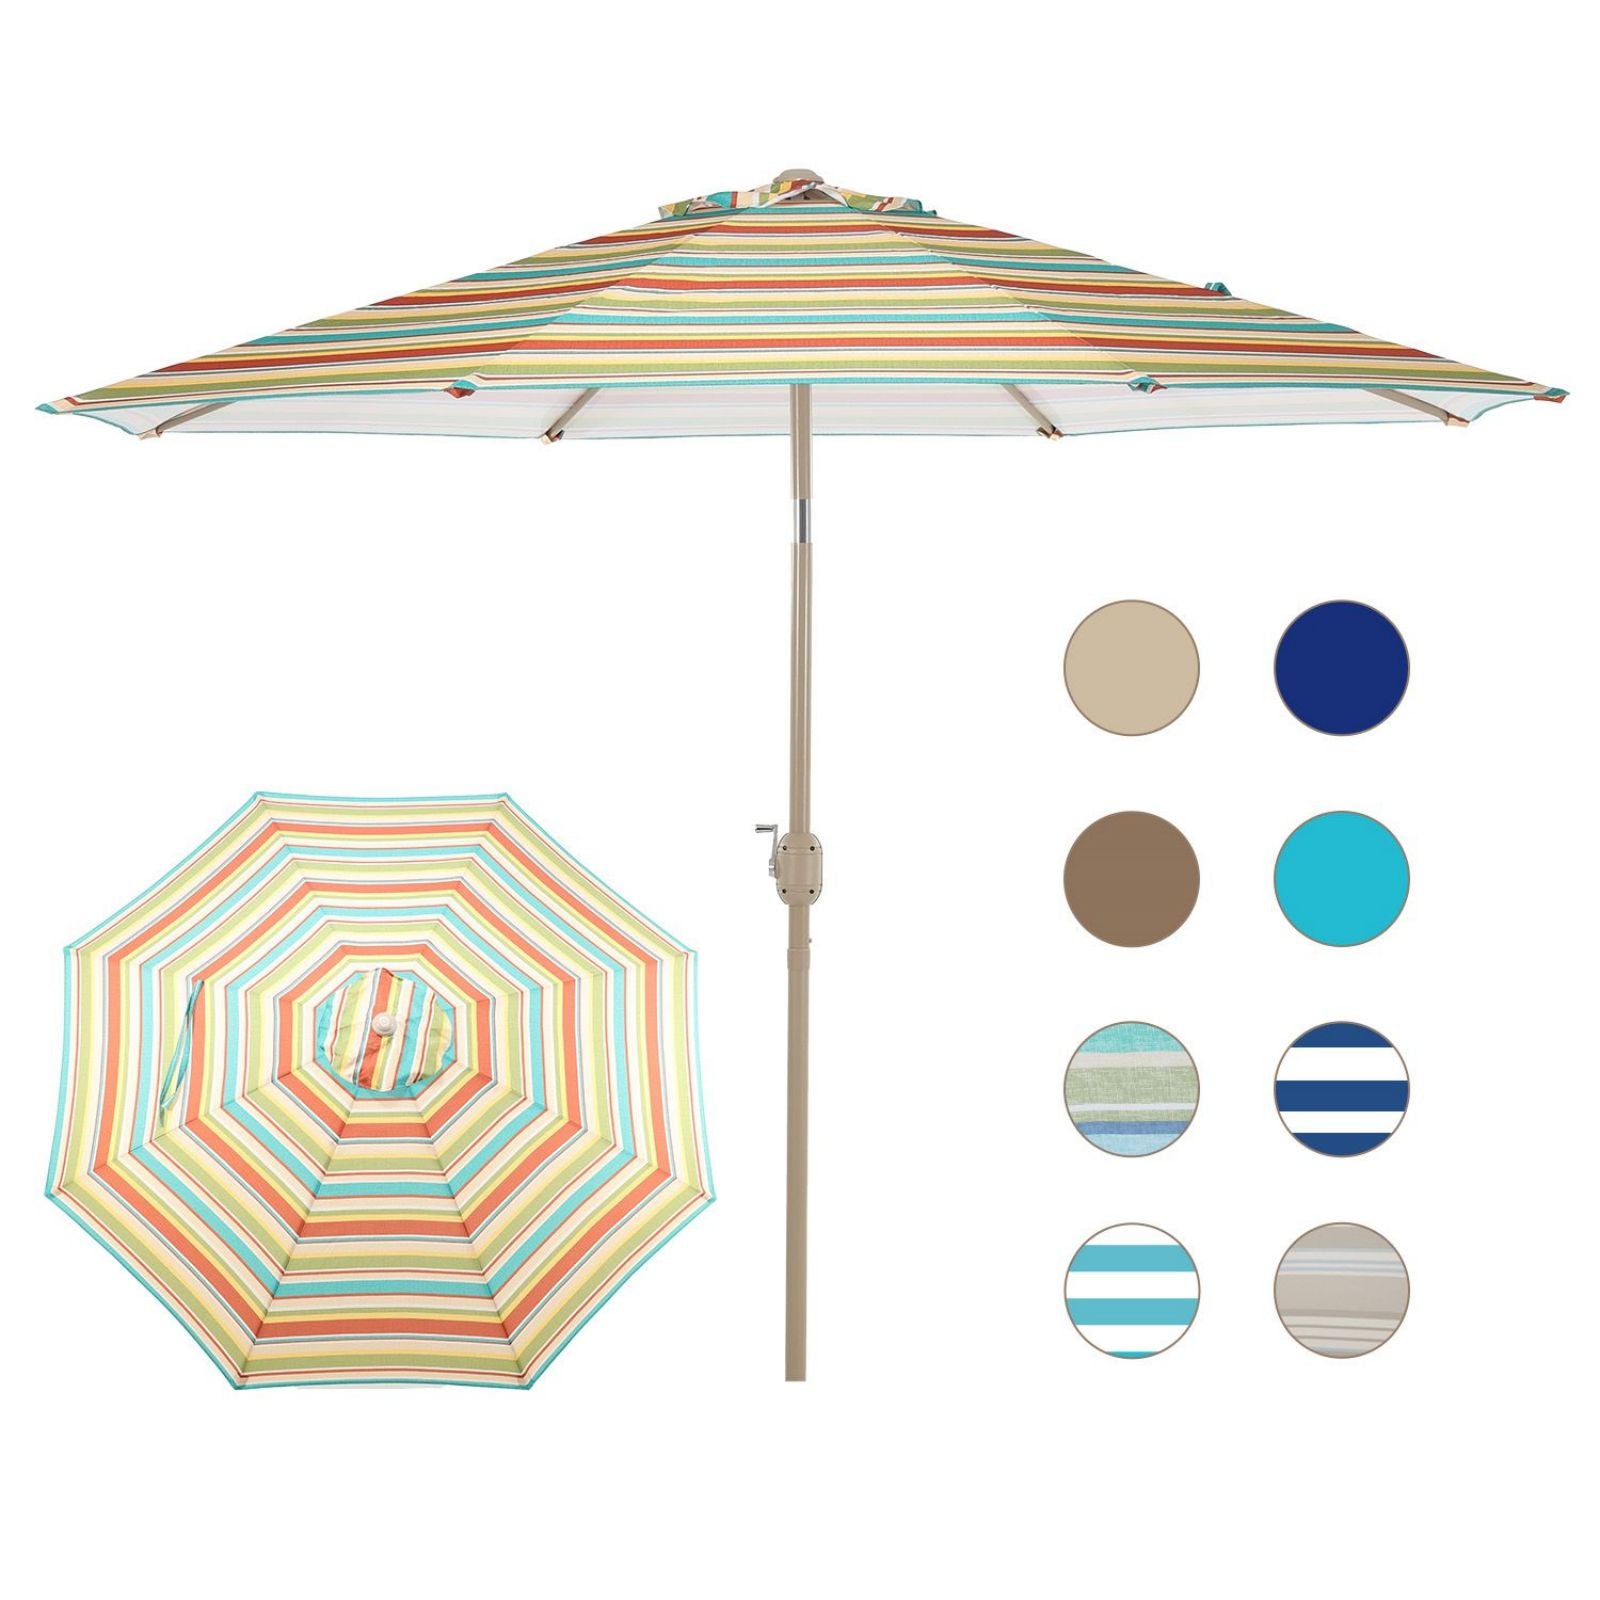 9FT Outdoor Patio Market Umbrella Aluminum Frame with Push Button Tilt Crank and 8 Steel Ribs, UV Protection  Aoodor  Red Green and Blue  